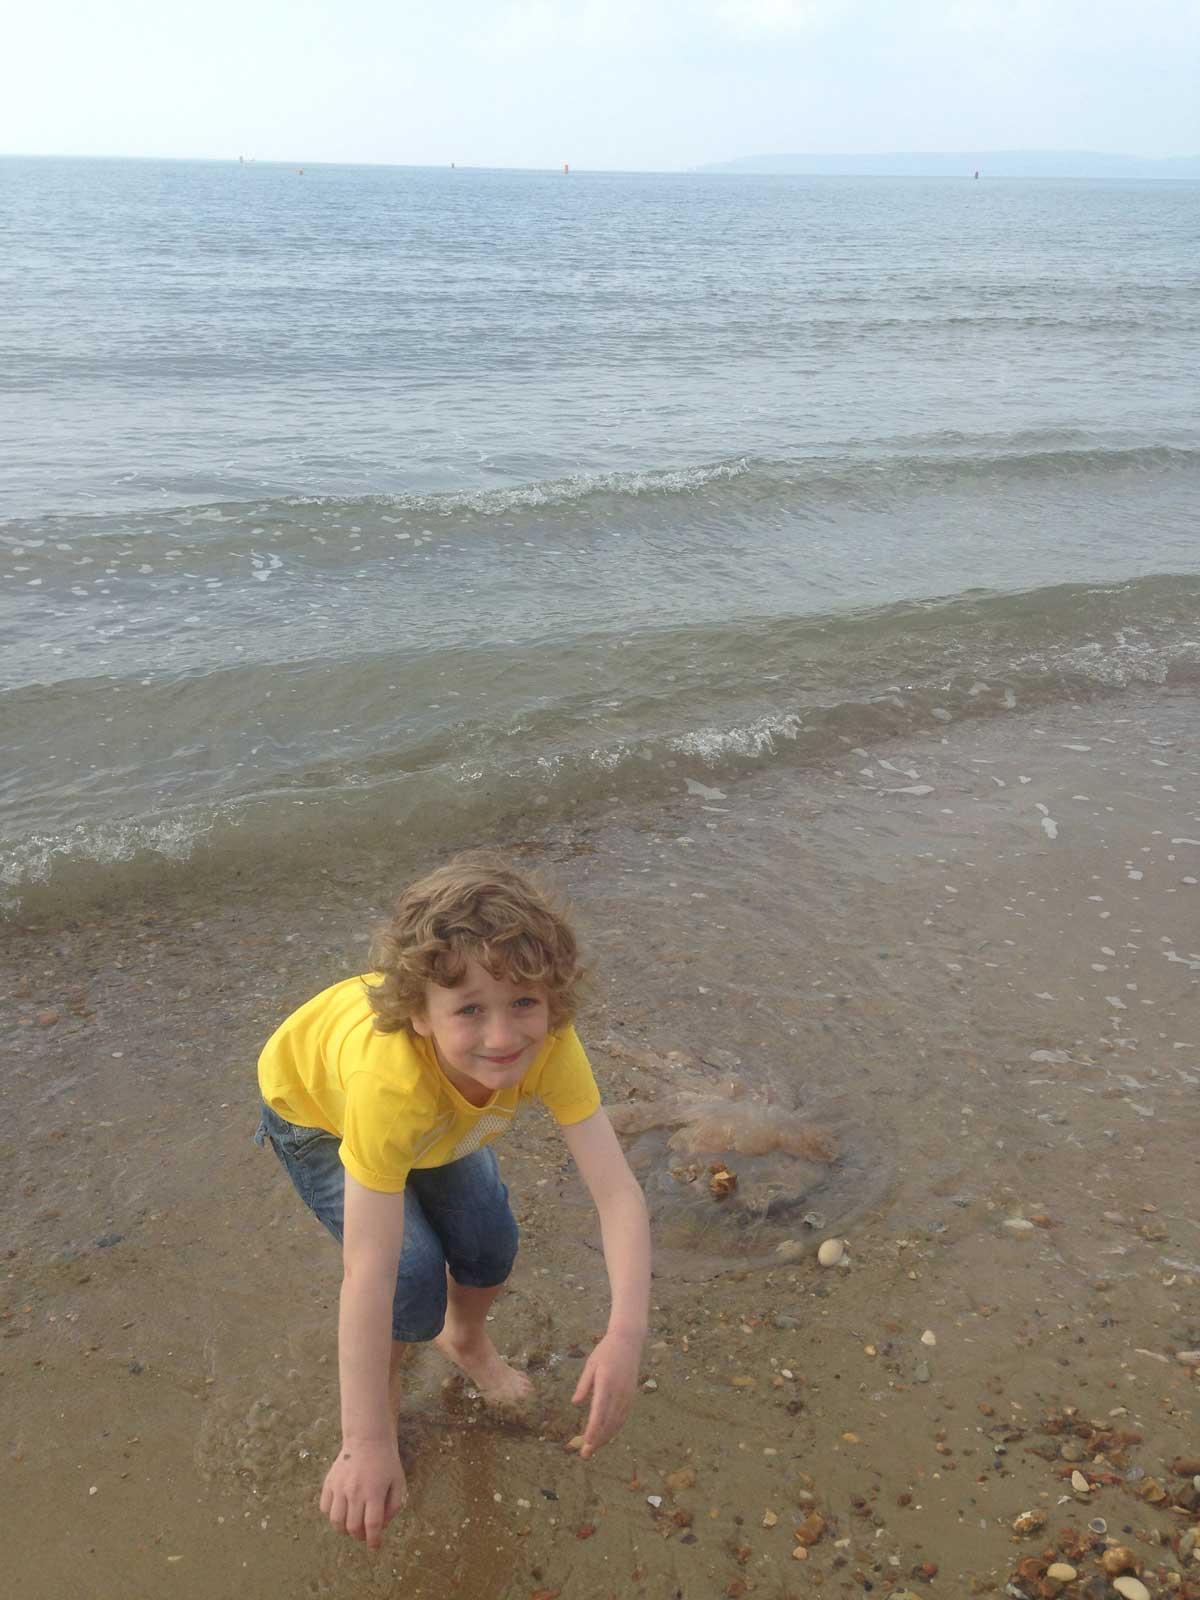 Seven-year-old Lucas Evans found a barrel jellyfish washed up on Bournemouth beach opposite the Zig Zag cliff path on West Cliff. 